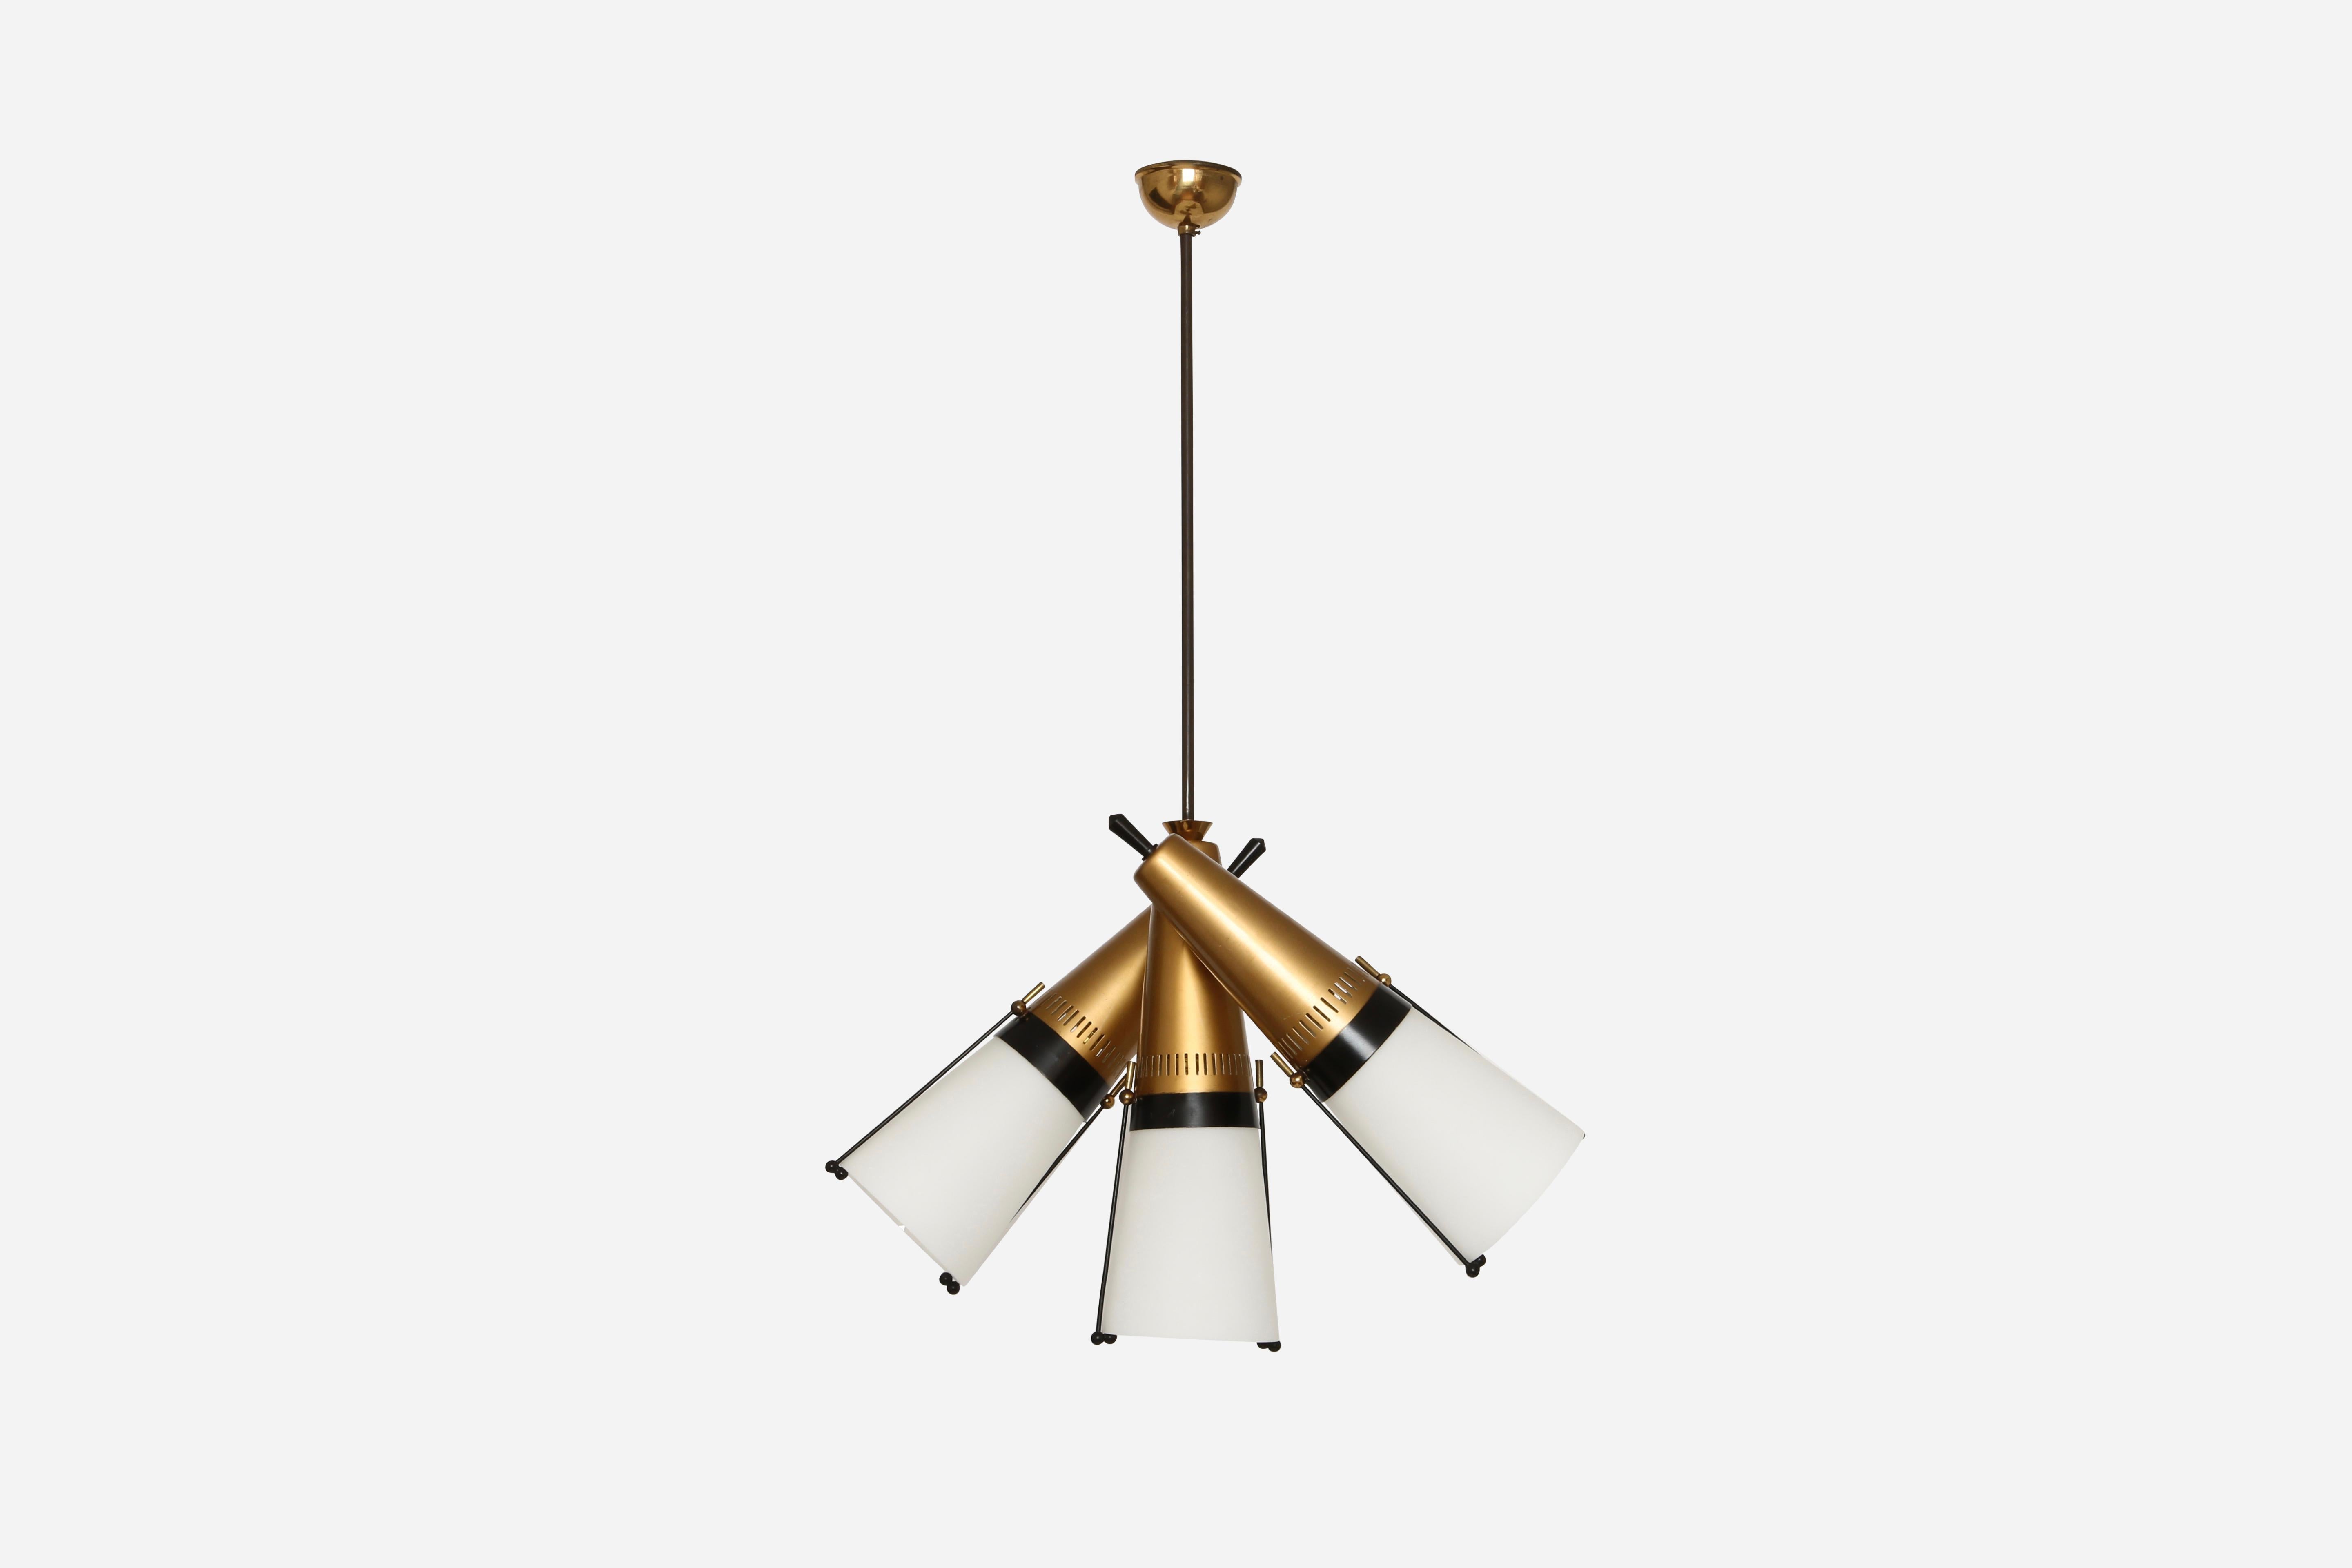 Ceiling pendant by Lamperti.
Designed and made in Italy in 1950s.
Glass, enameled metal, brass.
Takes 3 candelabra bulbs.
Complimentary US rewiring upon request.
Overall drop can be shorter.

We take pride in bringing vintage fixtures to their full